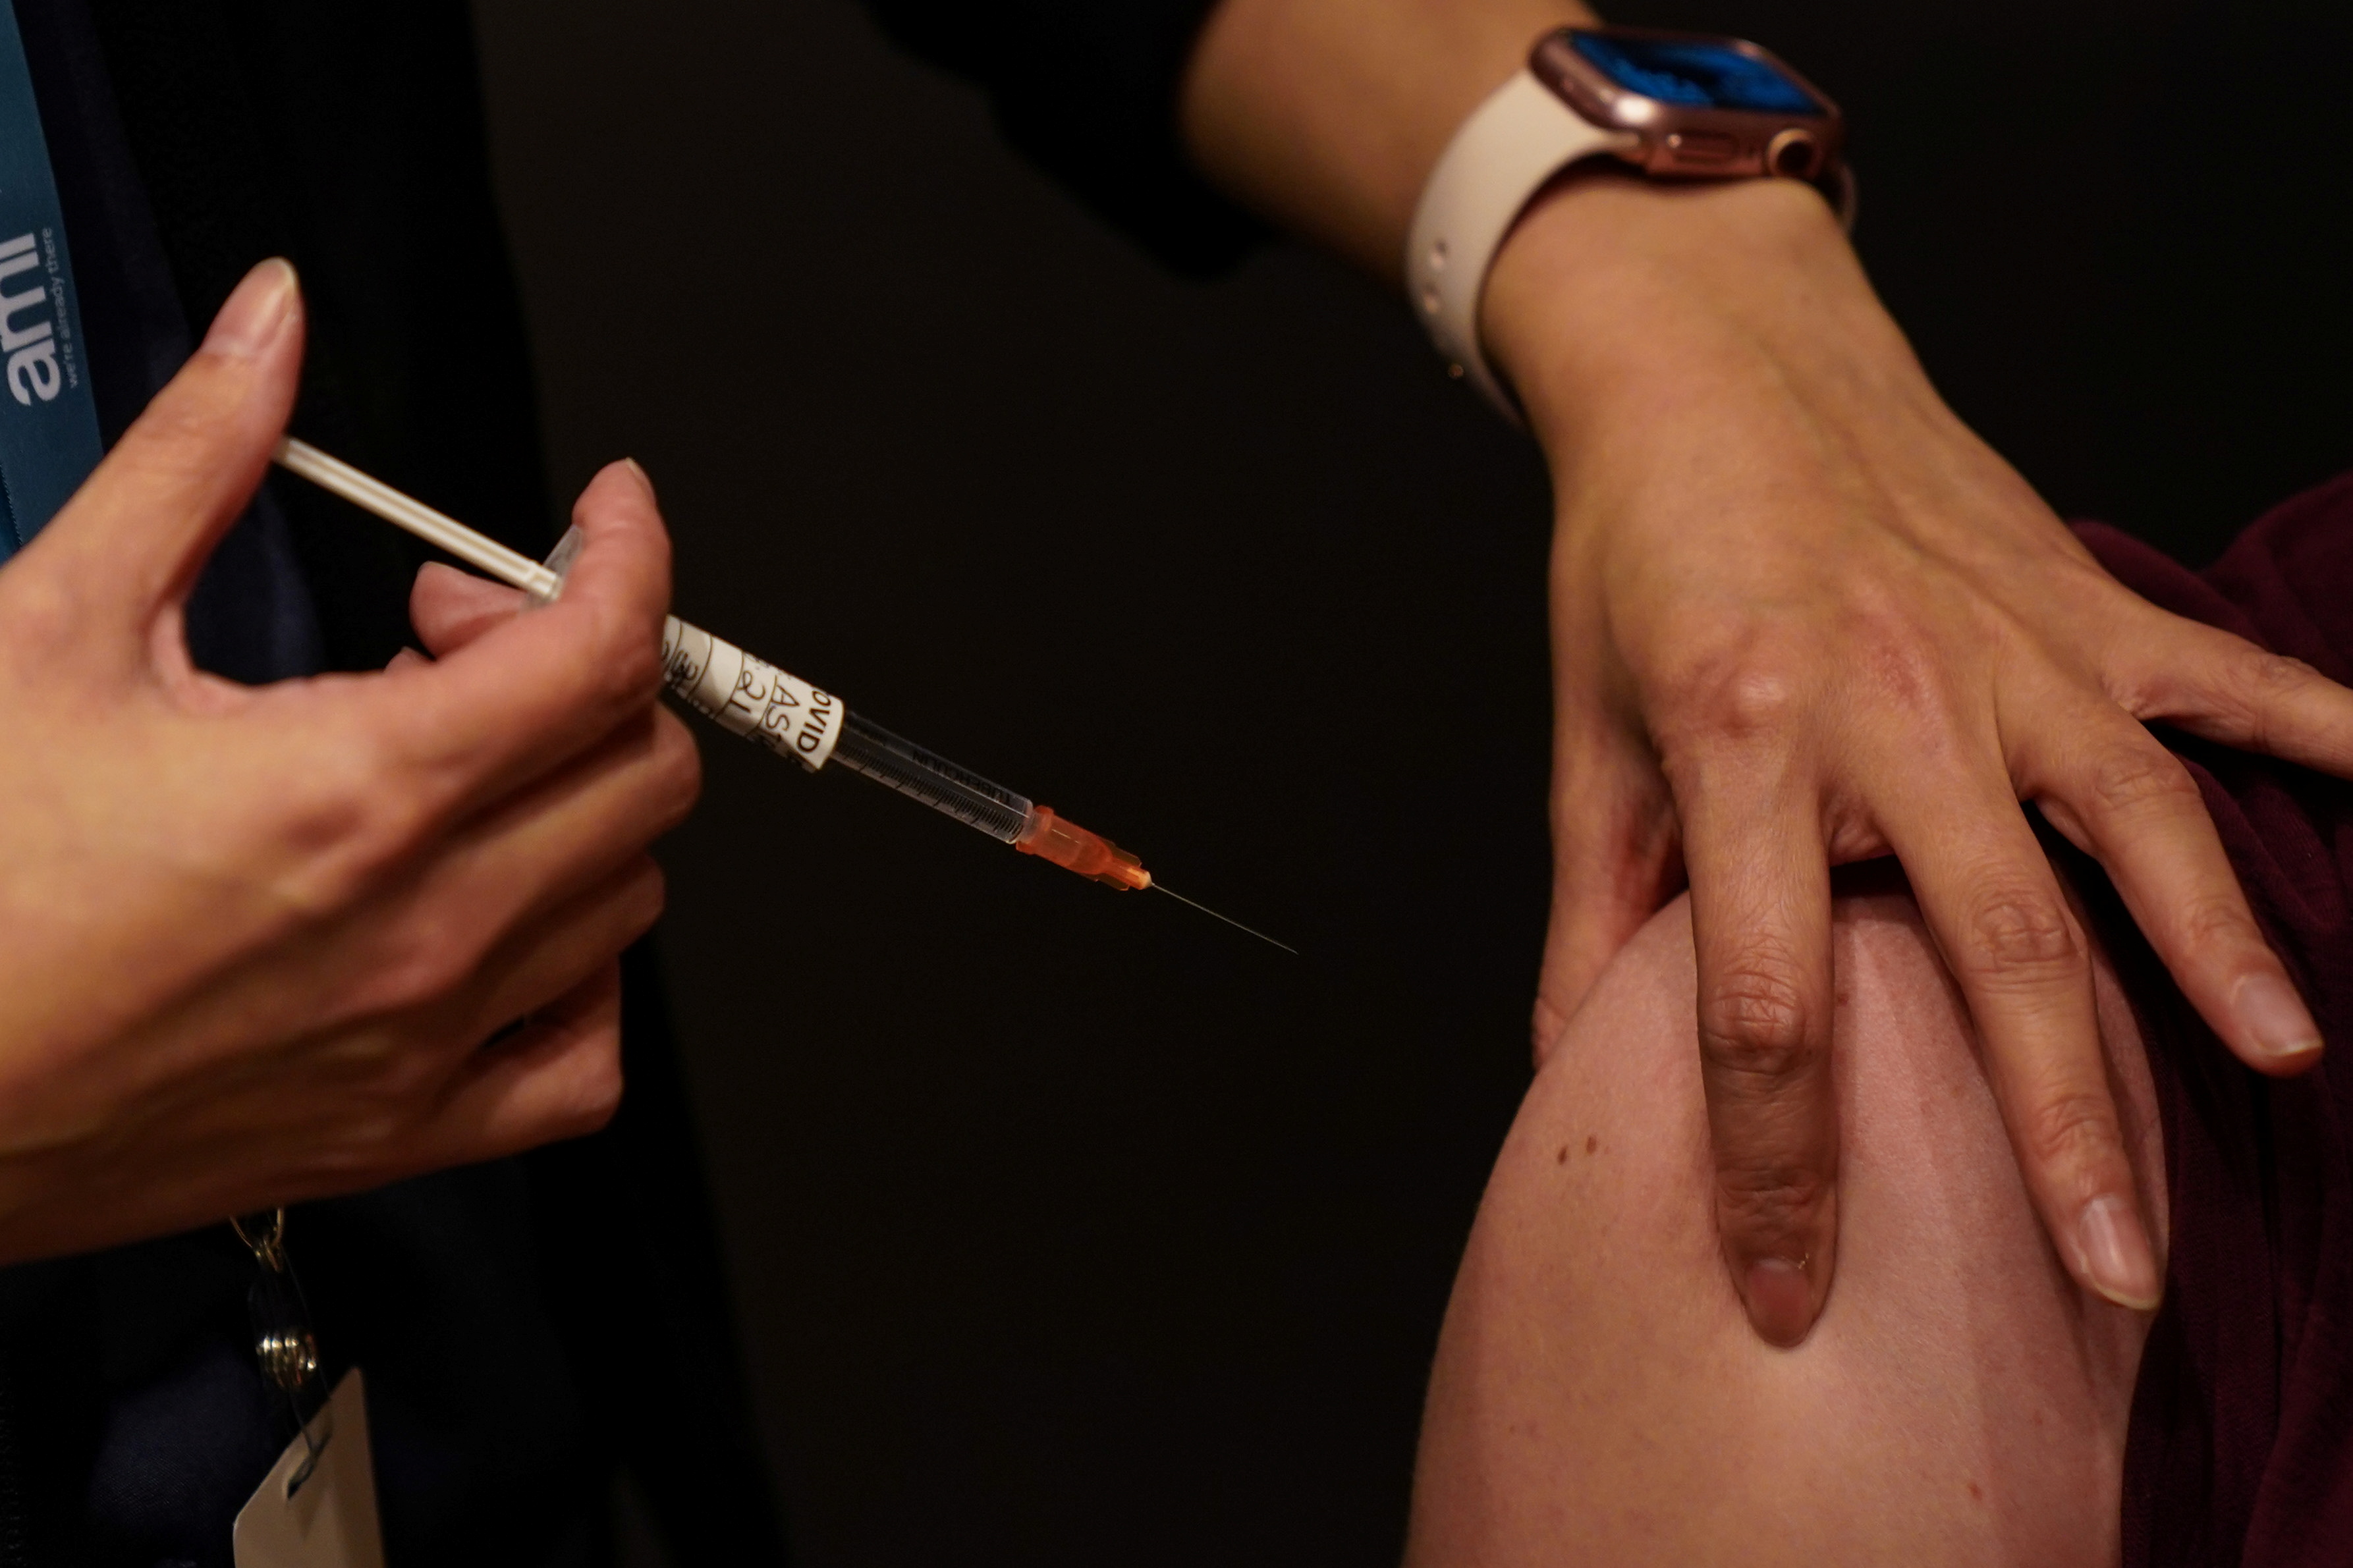 Push to increase vaccination rates continues as COVID-19 lockdown affects Sydney